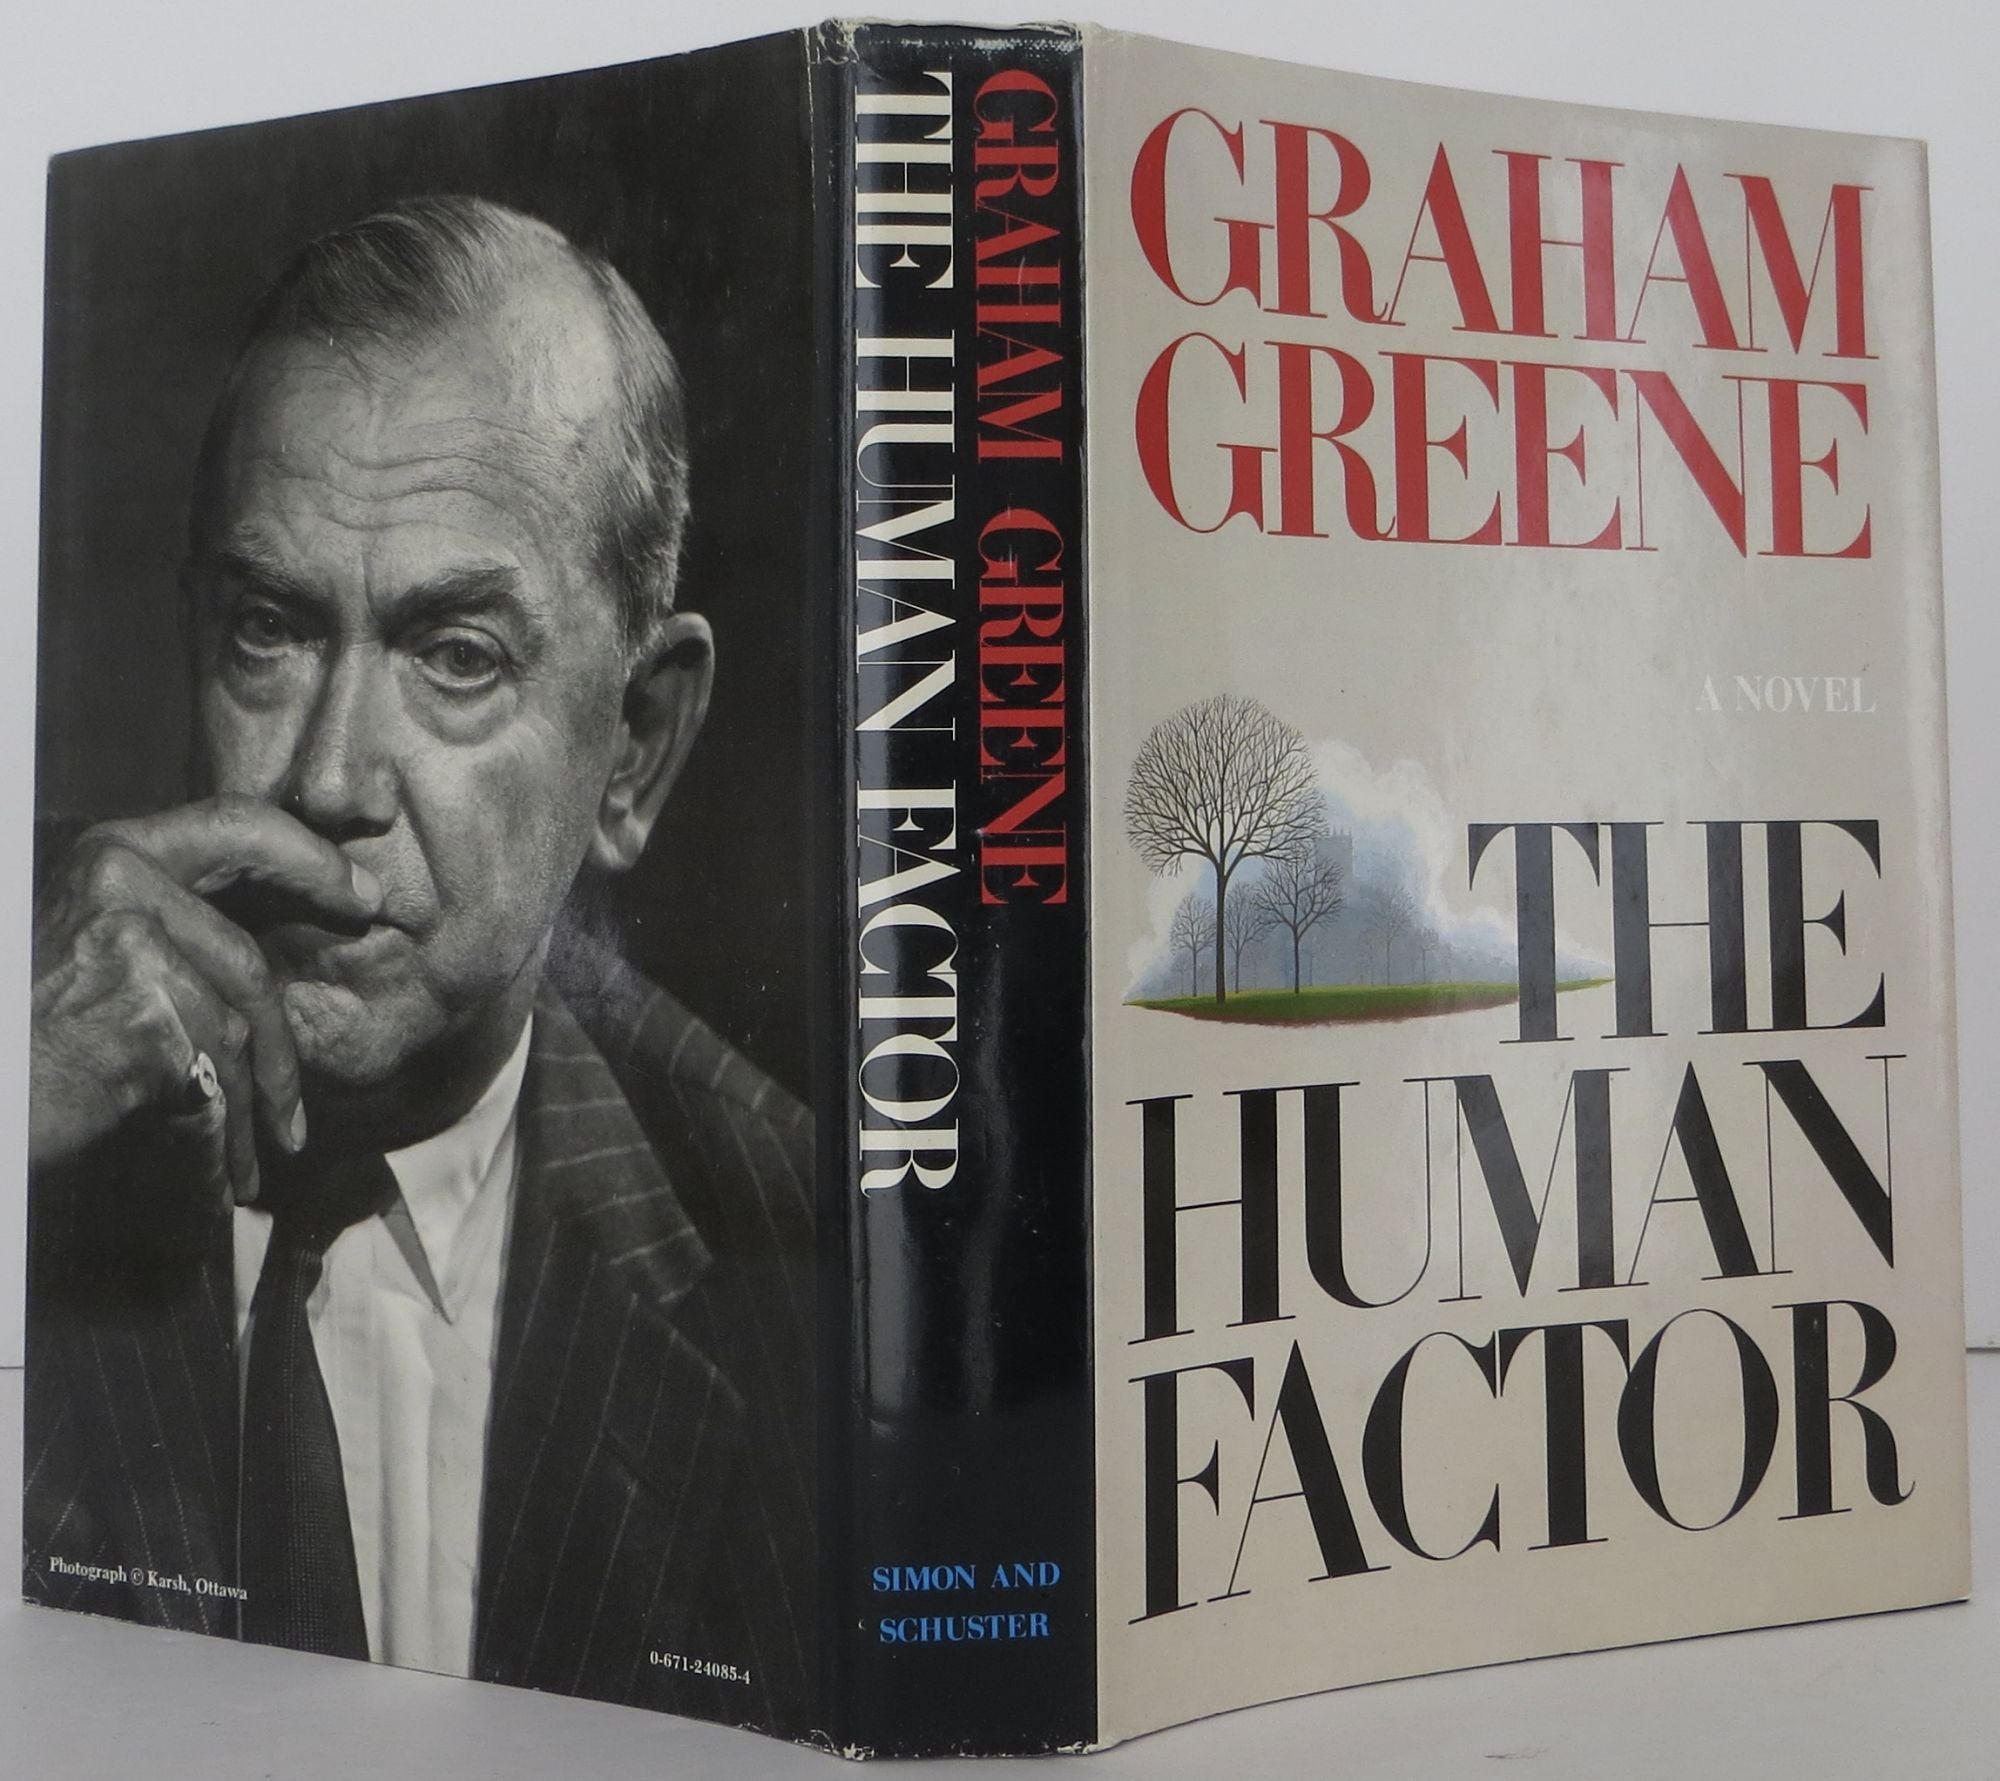 THE HUMAN FACTOR BY GRAHAM GREENE EVERYMAN'S LIBRARY LIKE NEW IN